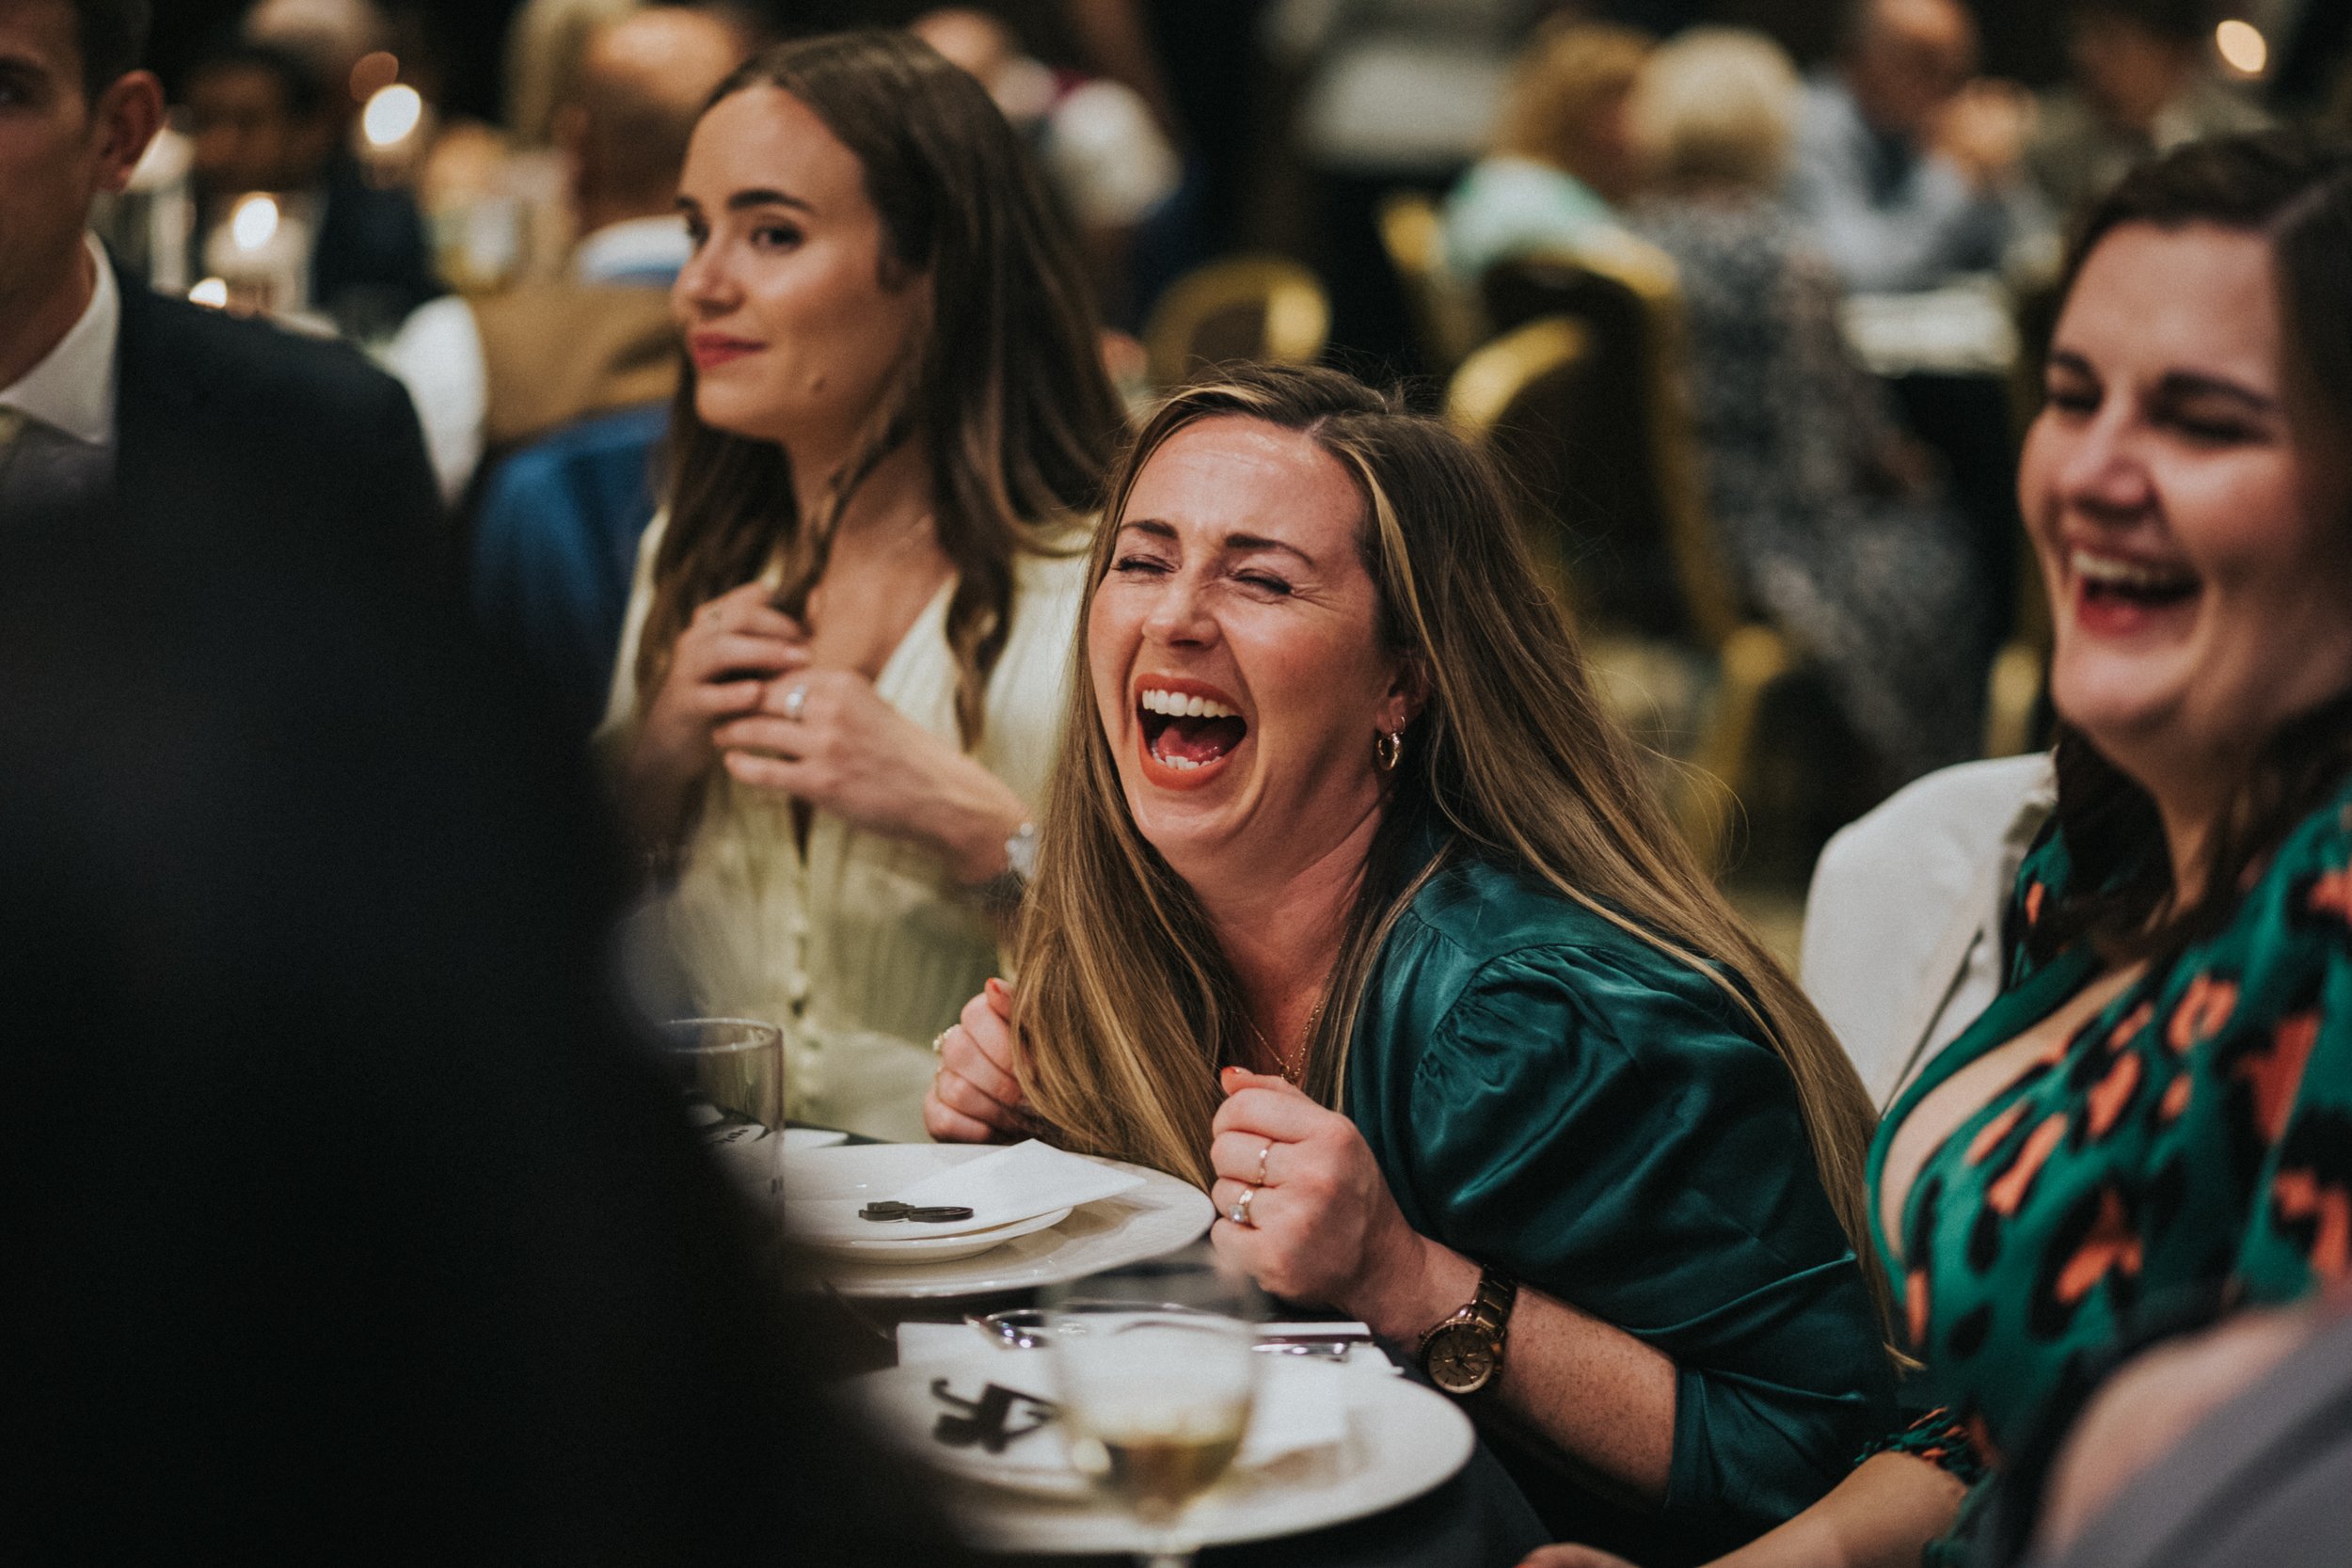 Female wedding guest dressed in green laughing. 